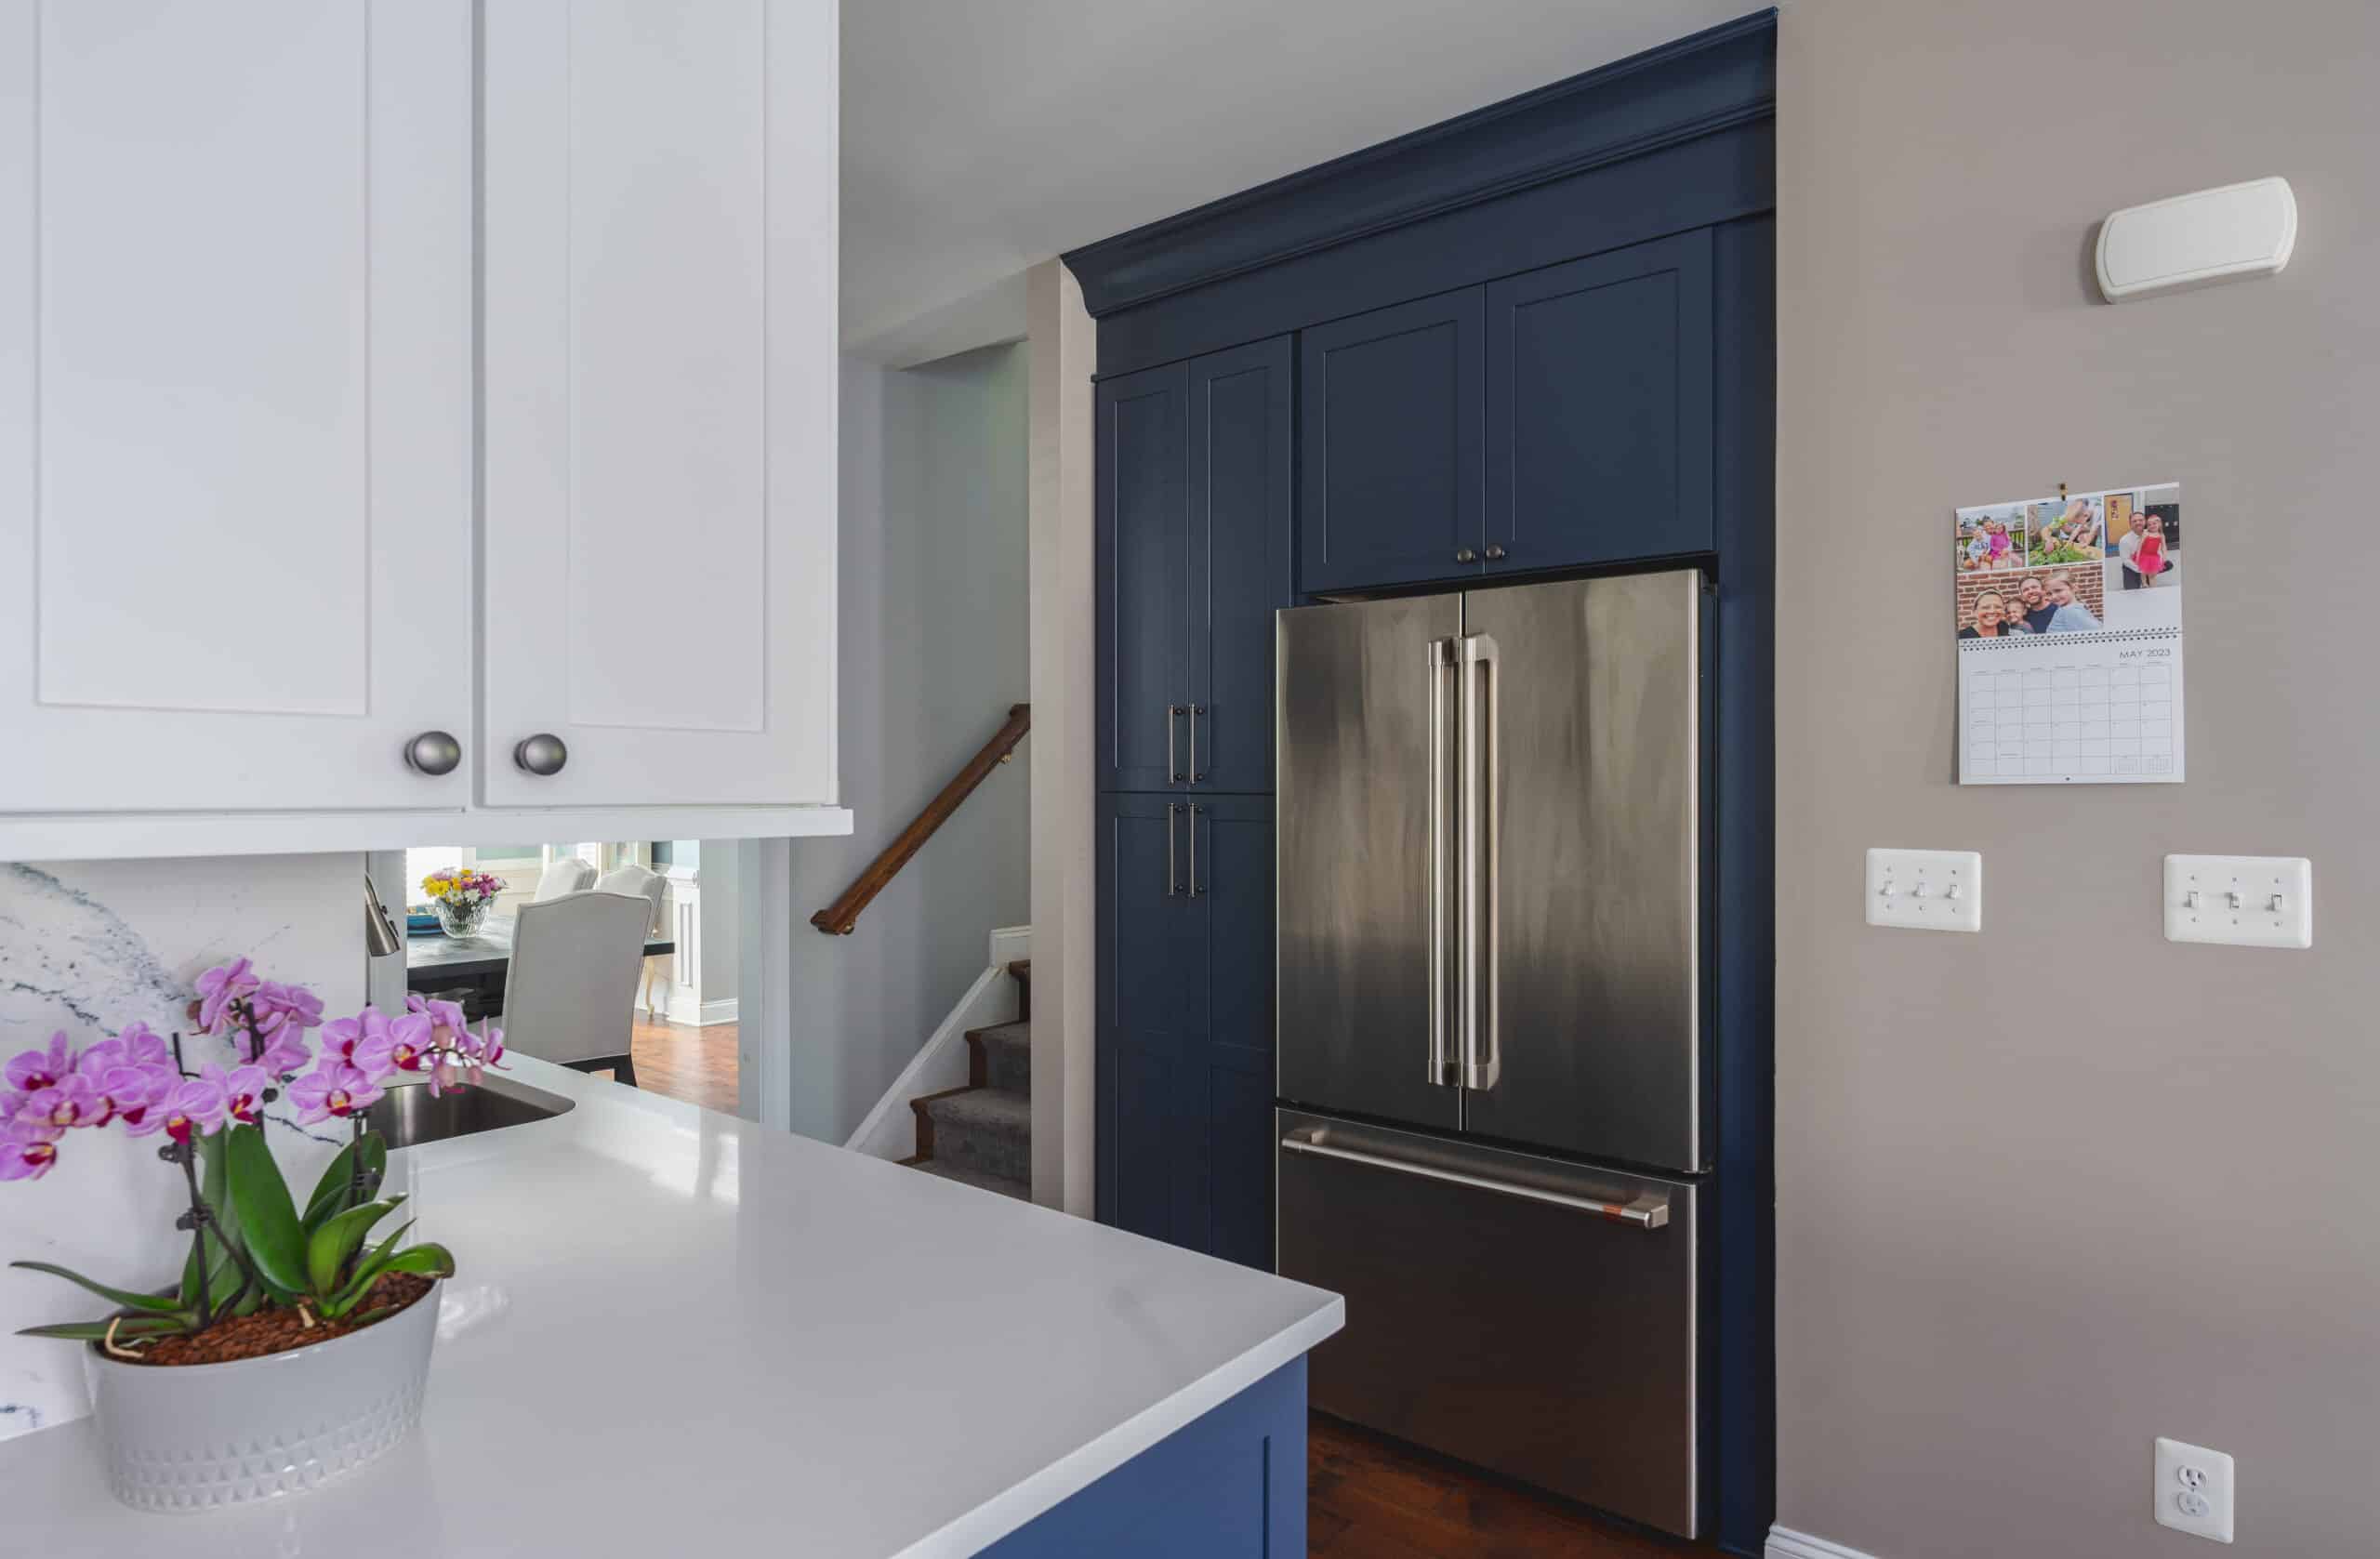 Contemporary kitchen featuring blue cabinets and stainless steel appliances